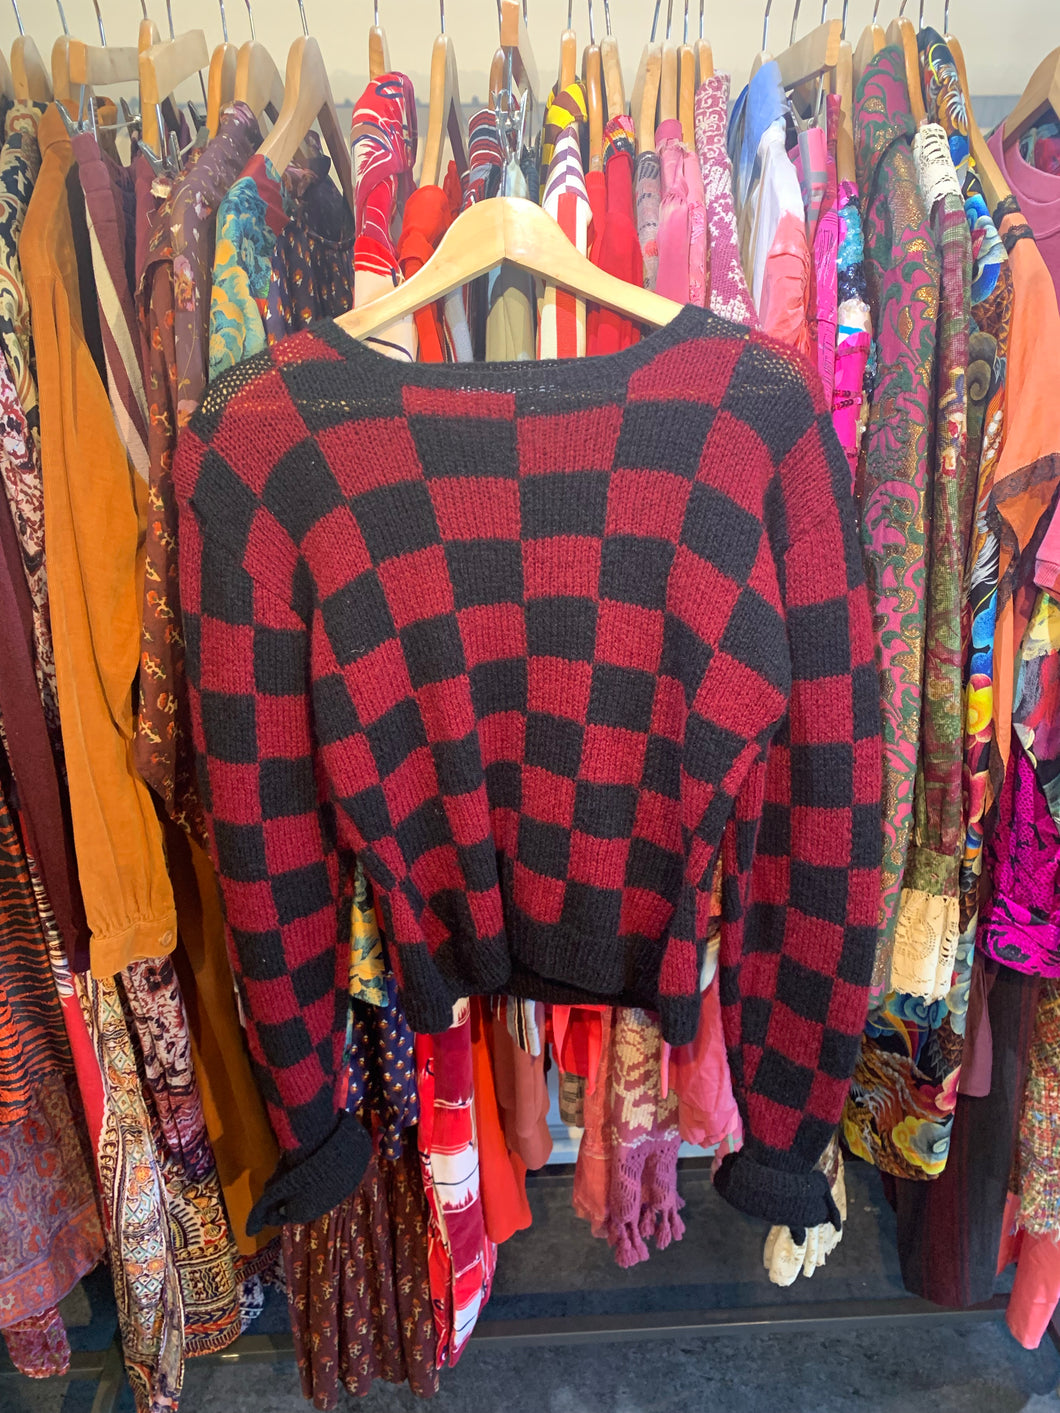 Vintage Perry Ellis Checkered Sweater - The Curatorial Dept.